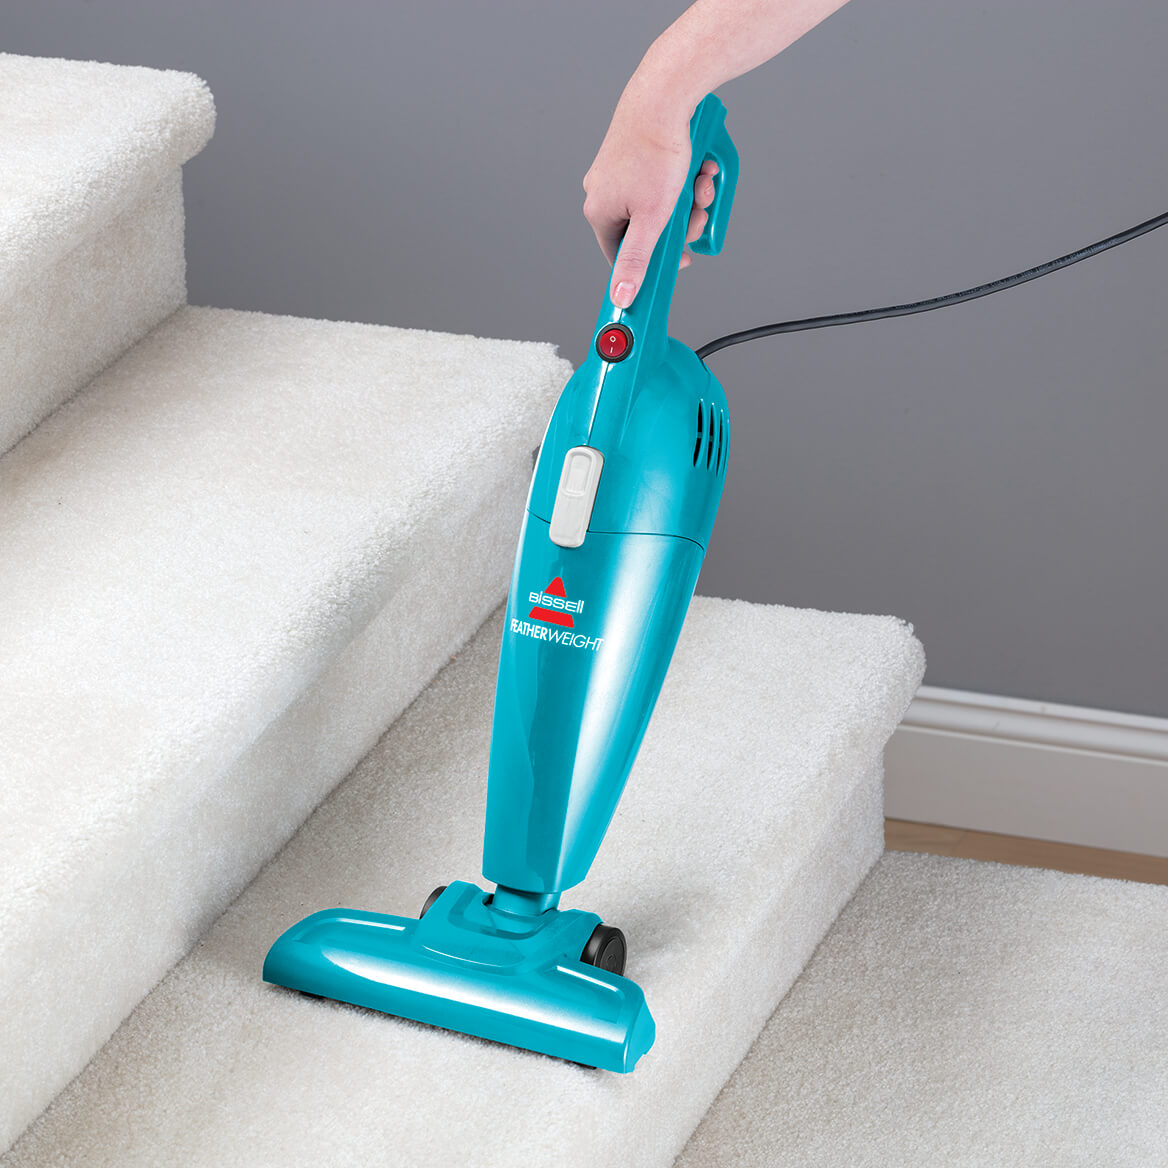 Bissell Featherweight Stick Lightweight Bagless Vacuum Vacuums & Electric Broom in Teal, BSL2033 - image 3 of 3